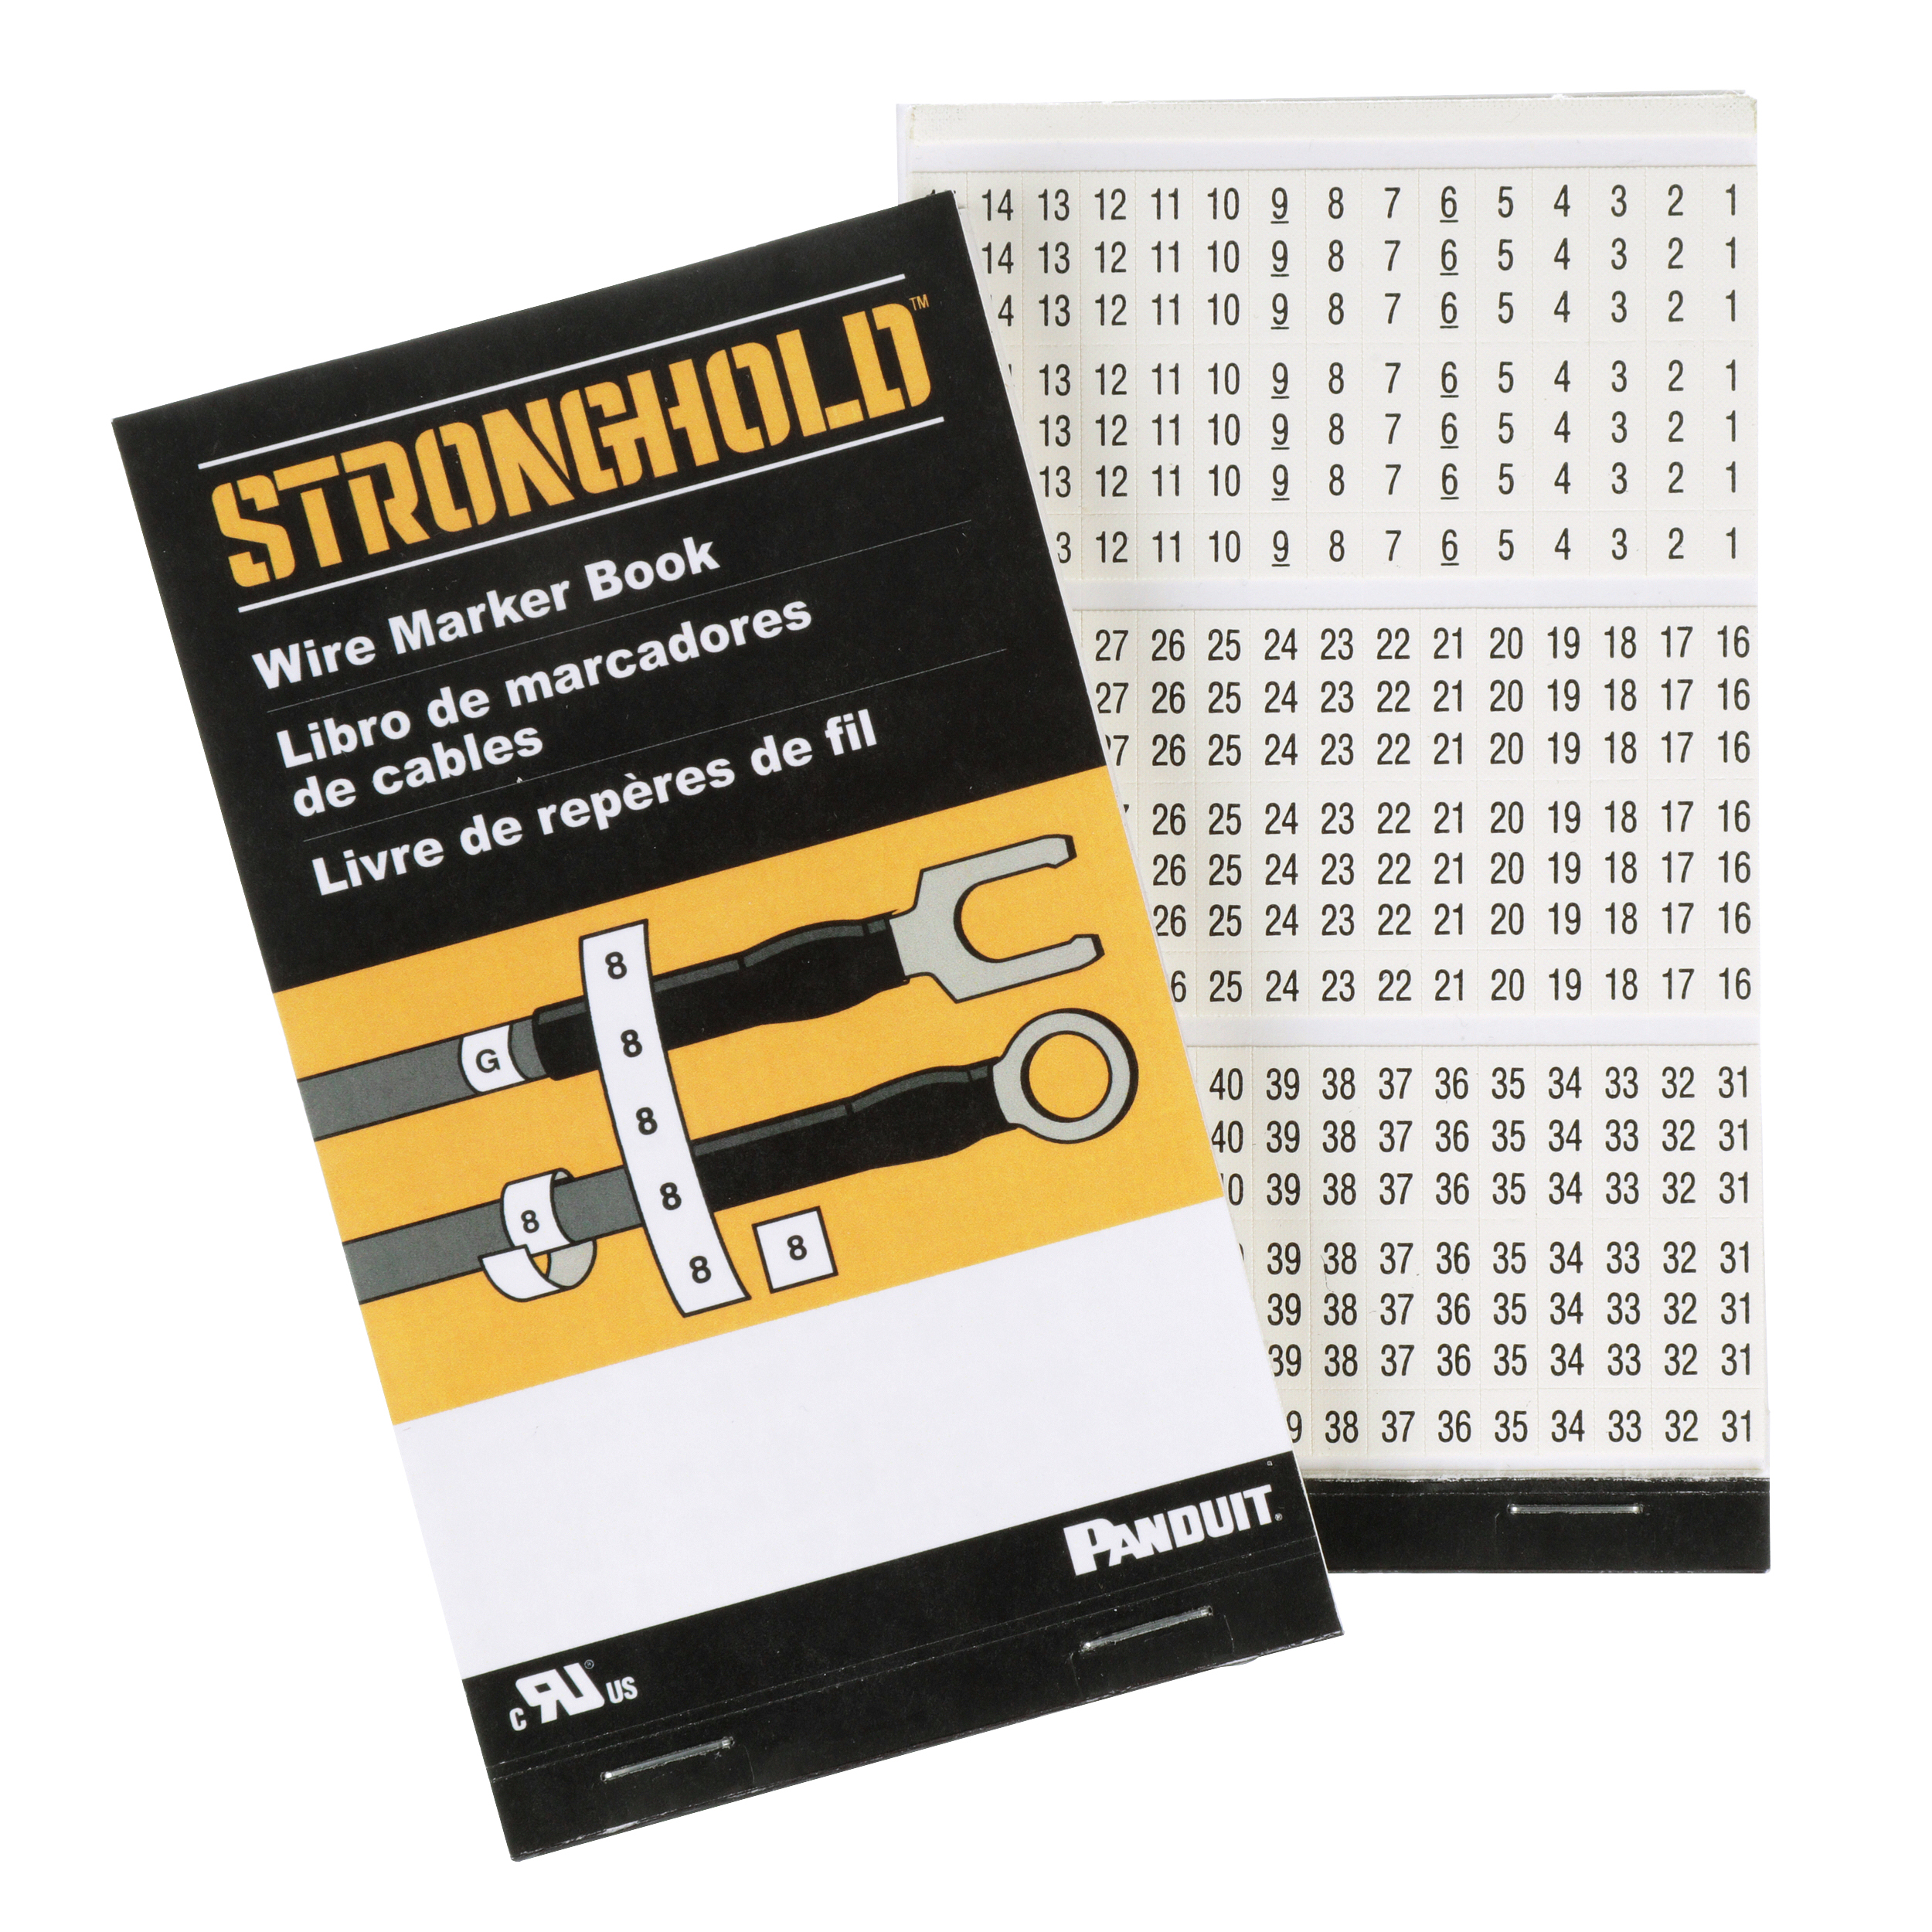 StrongHold™ PCMB-10 Pre-Printed Wire Marker Book